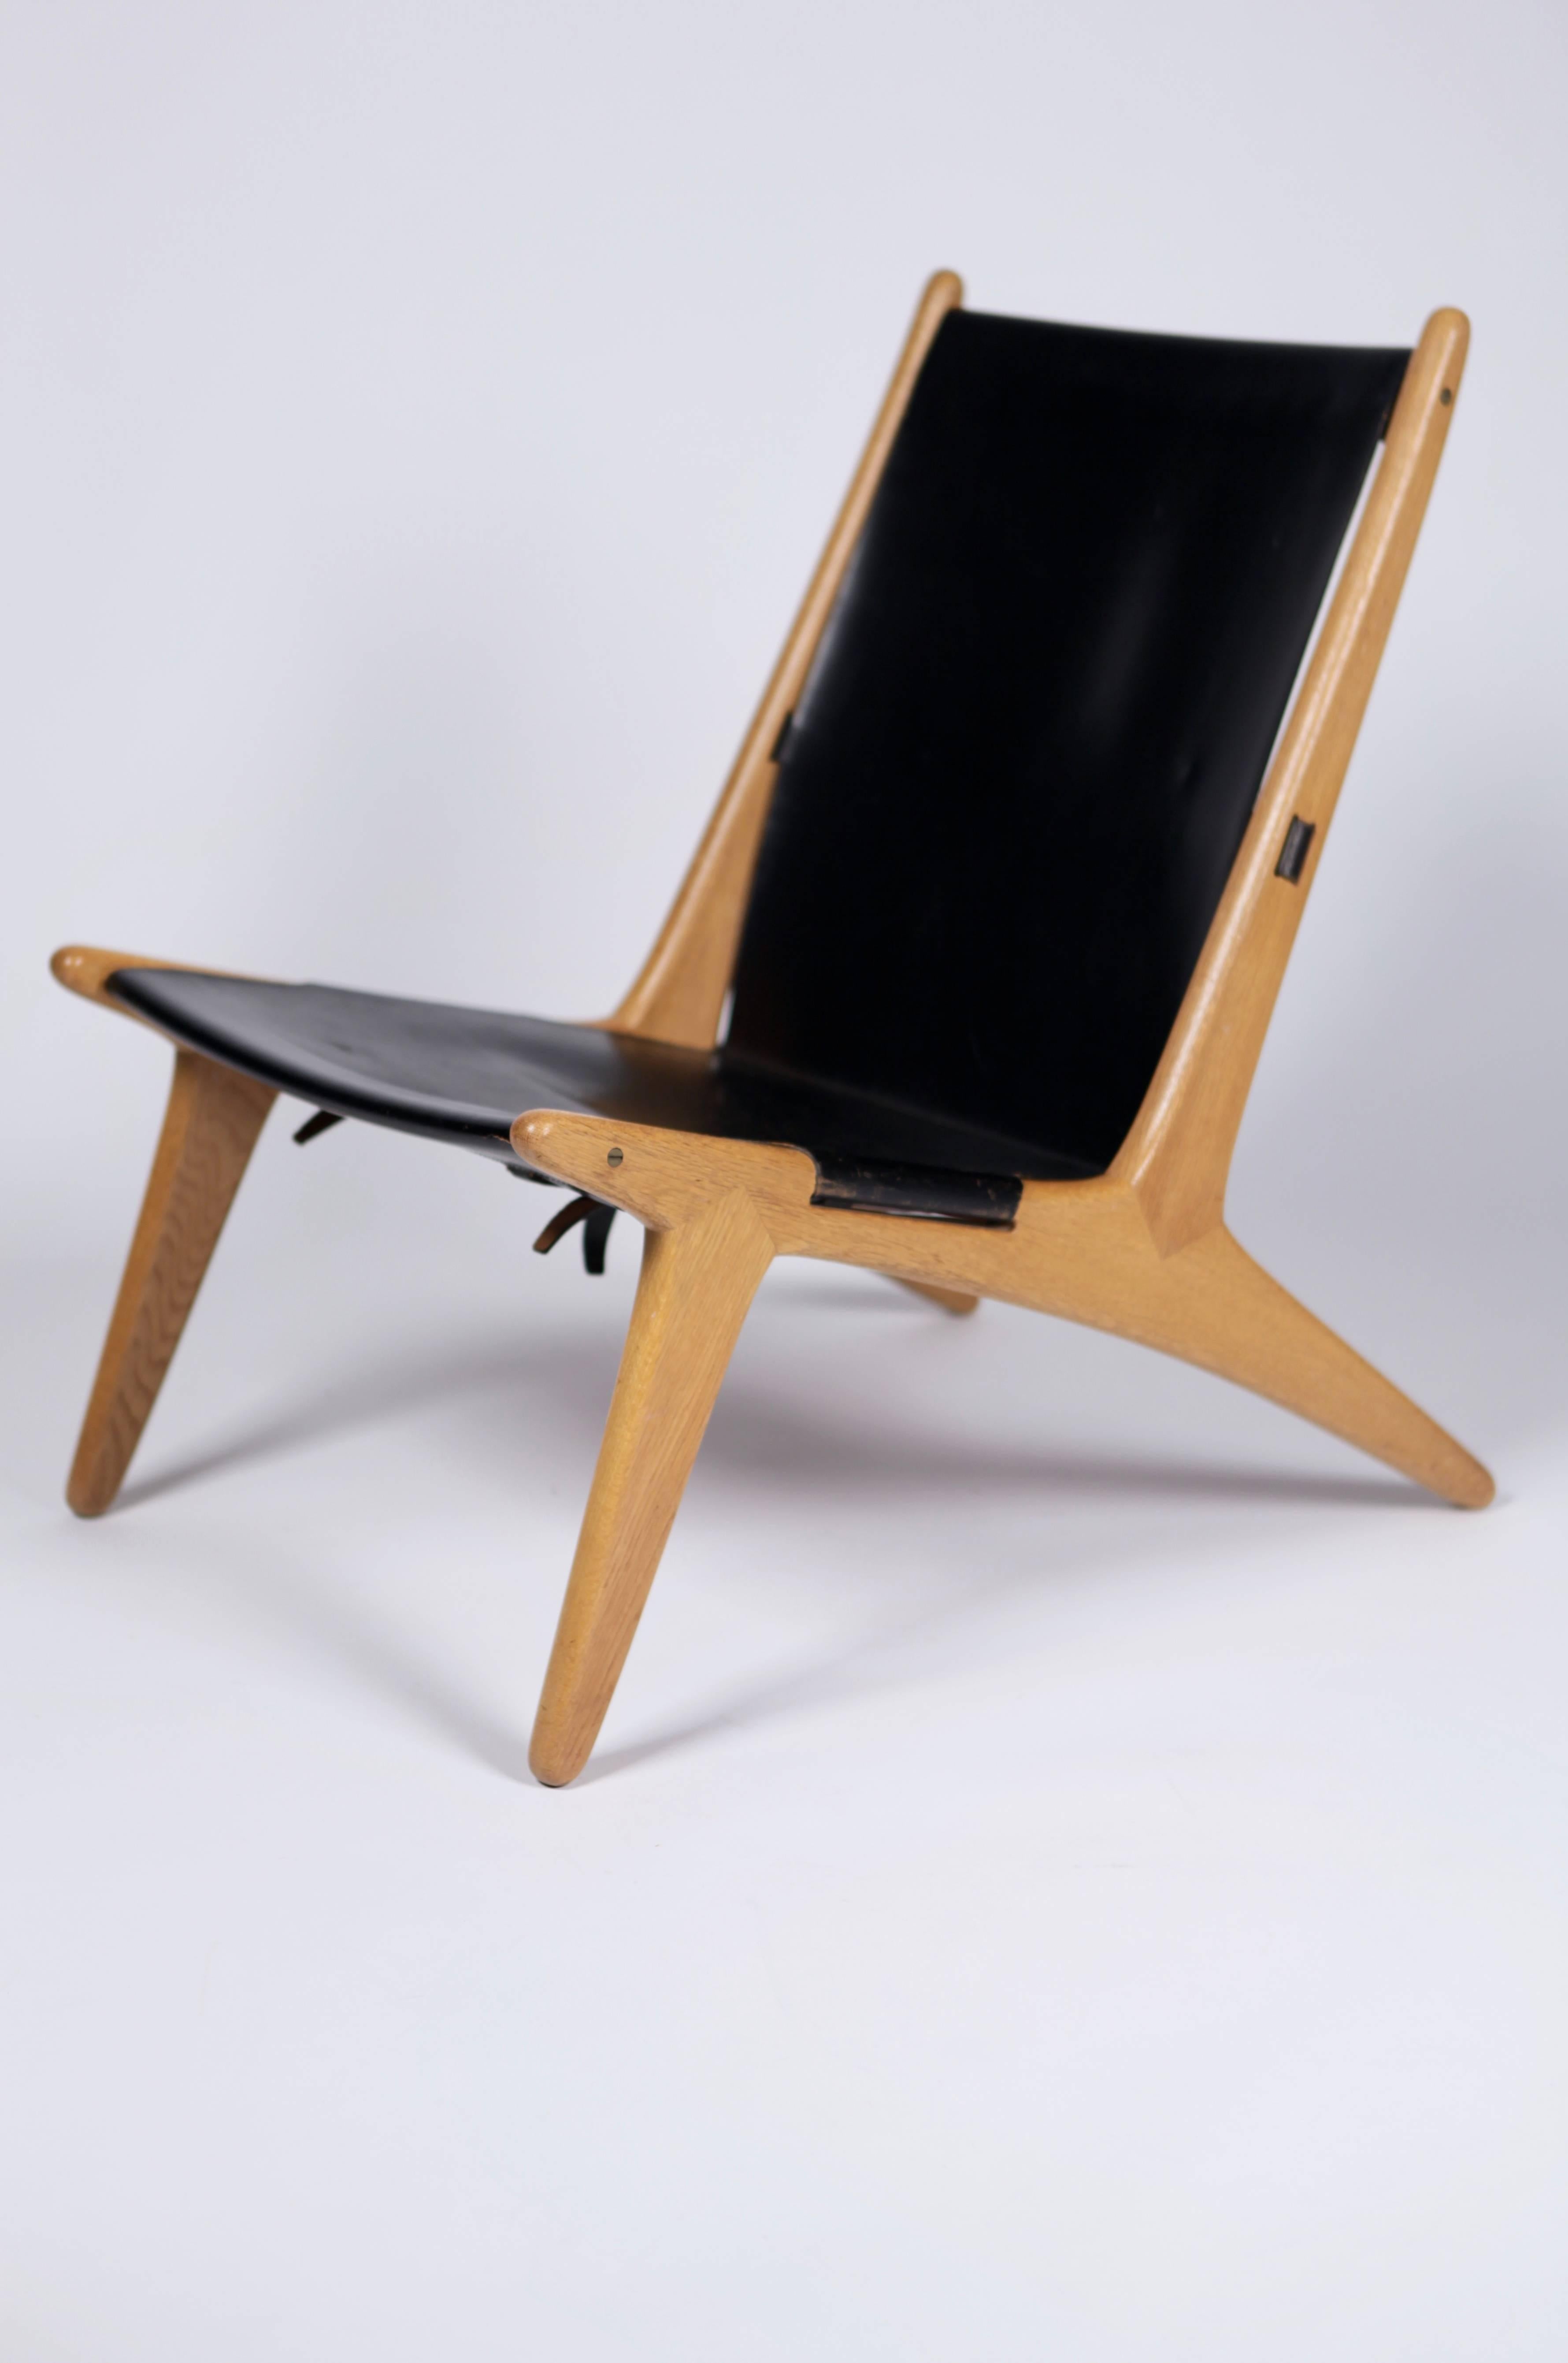 Beautiful lounge chair, model 204 by Uno & Östen Kristiansson, in solid oak and original black leather.
